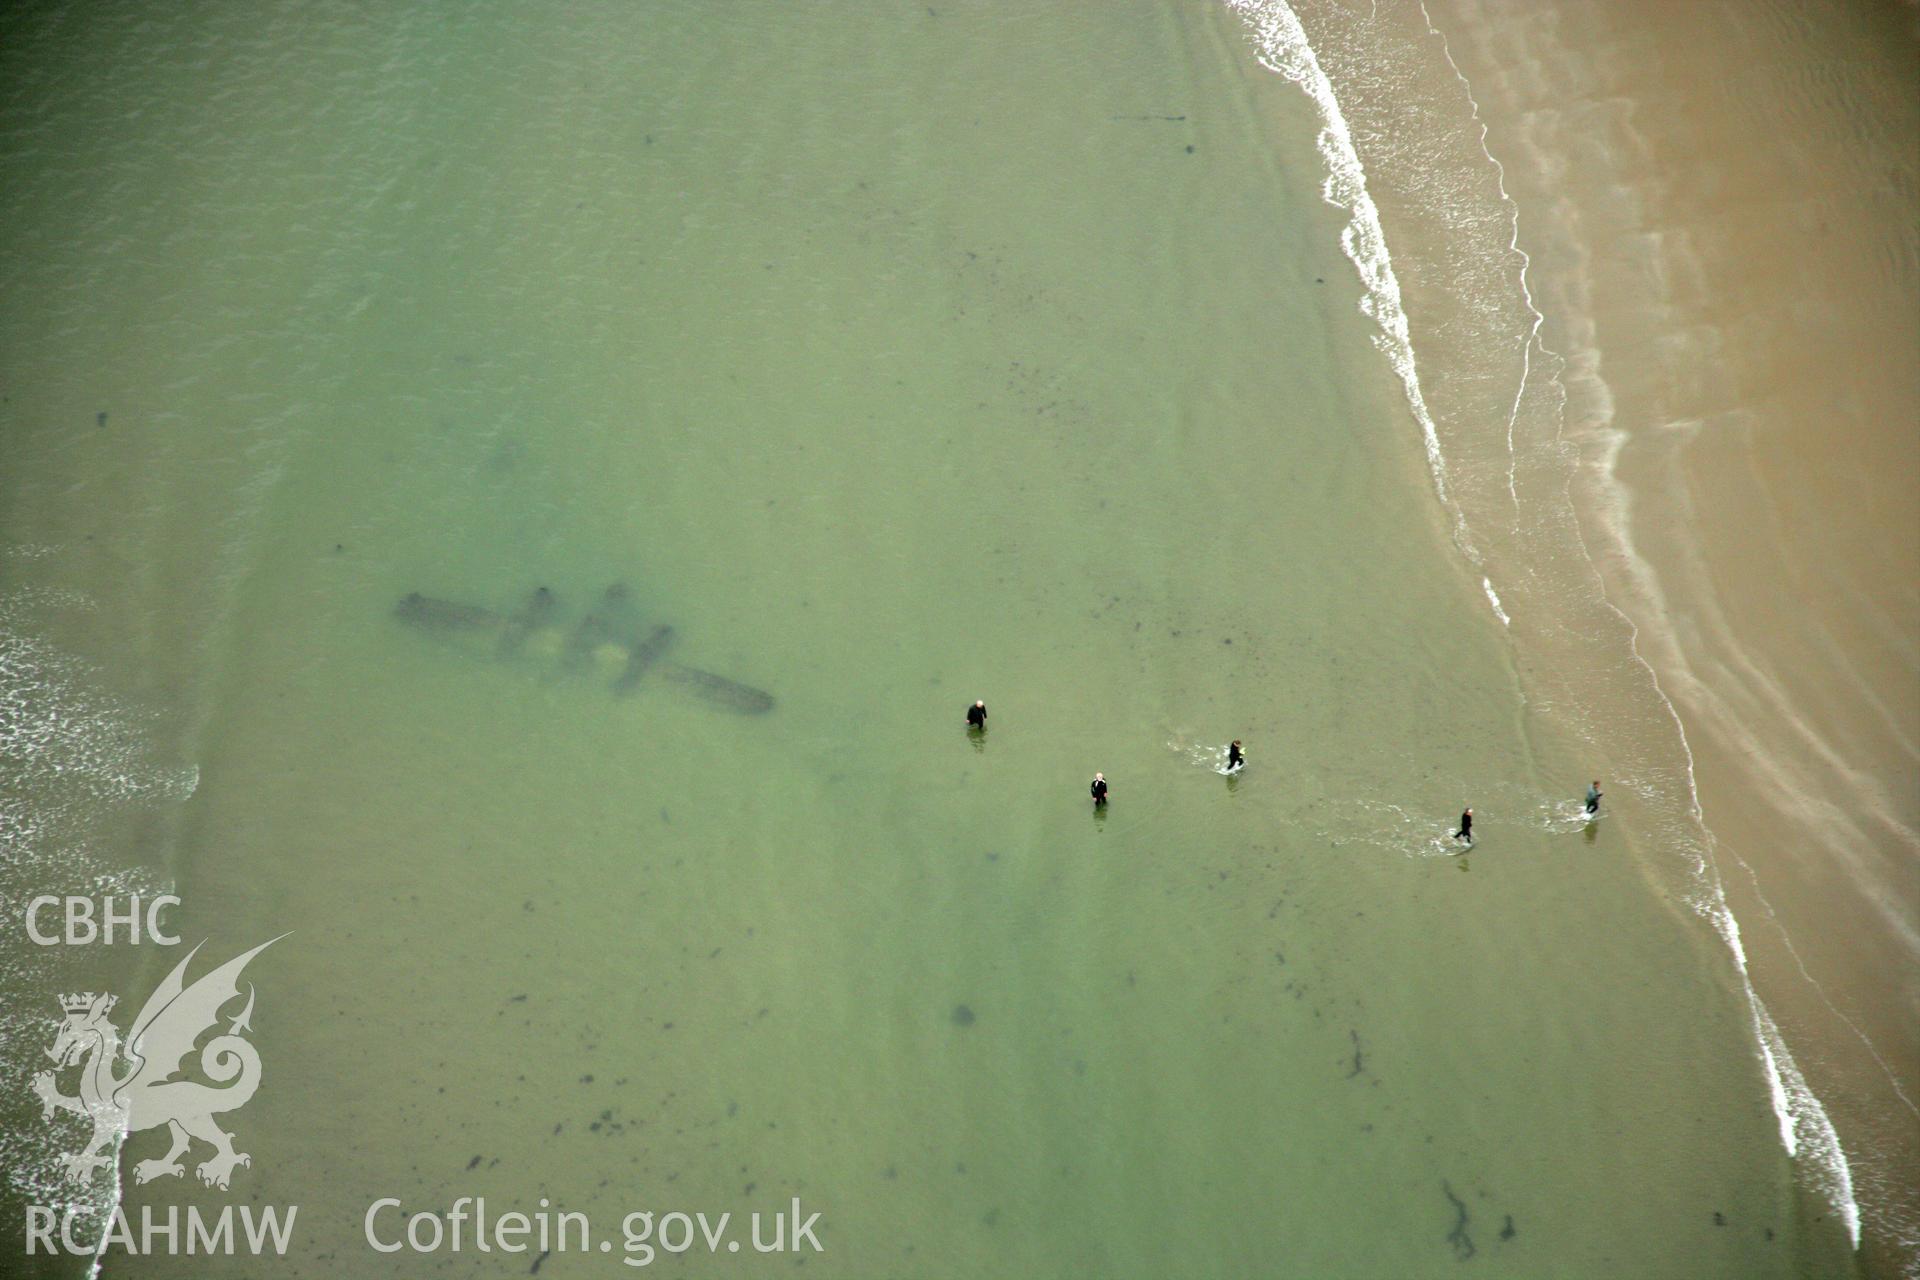 RCAHMW colour oblique photograph of P-38 Lightning, aircraft wreck at low tide. Taken by Toby Driver on 08/10/2007.